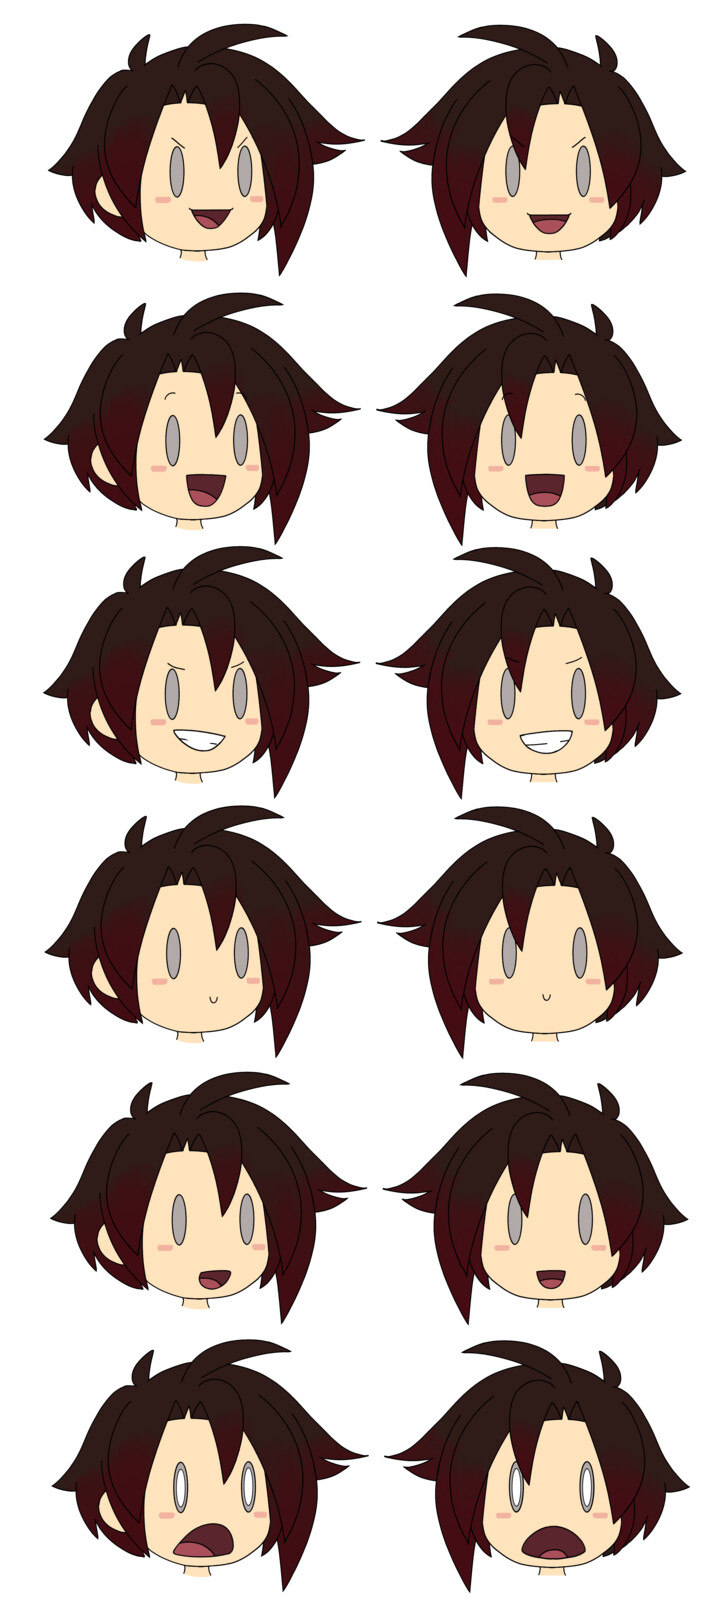 expressions (same mouths were applied to other characters)